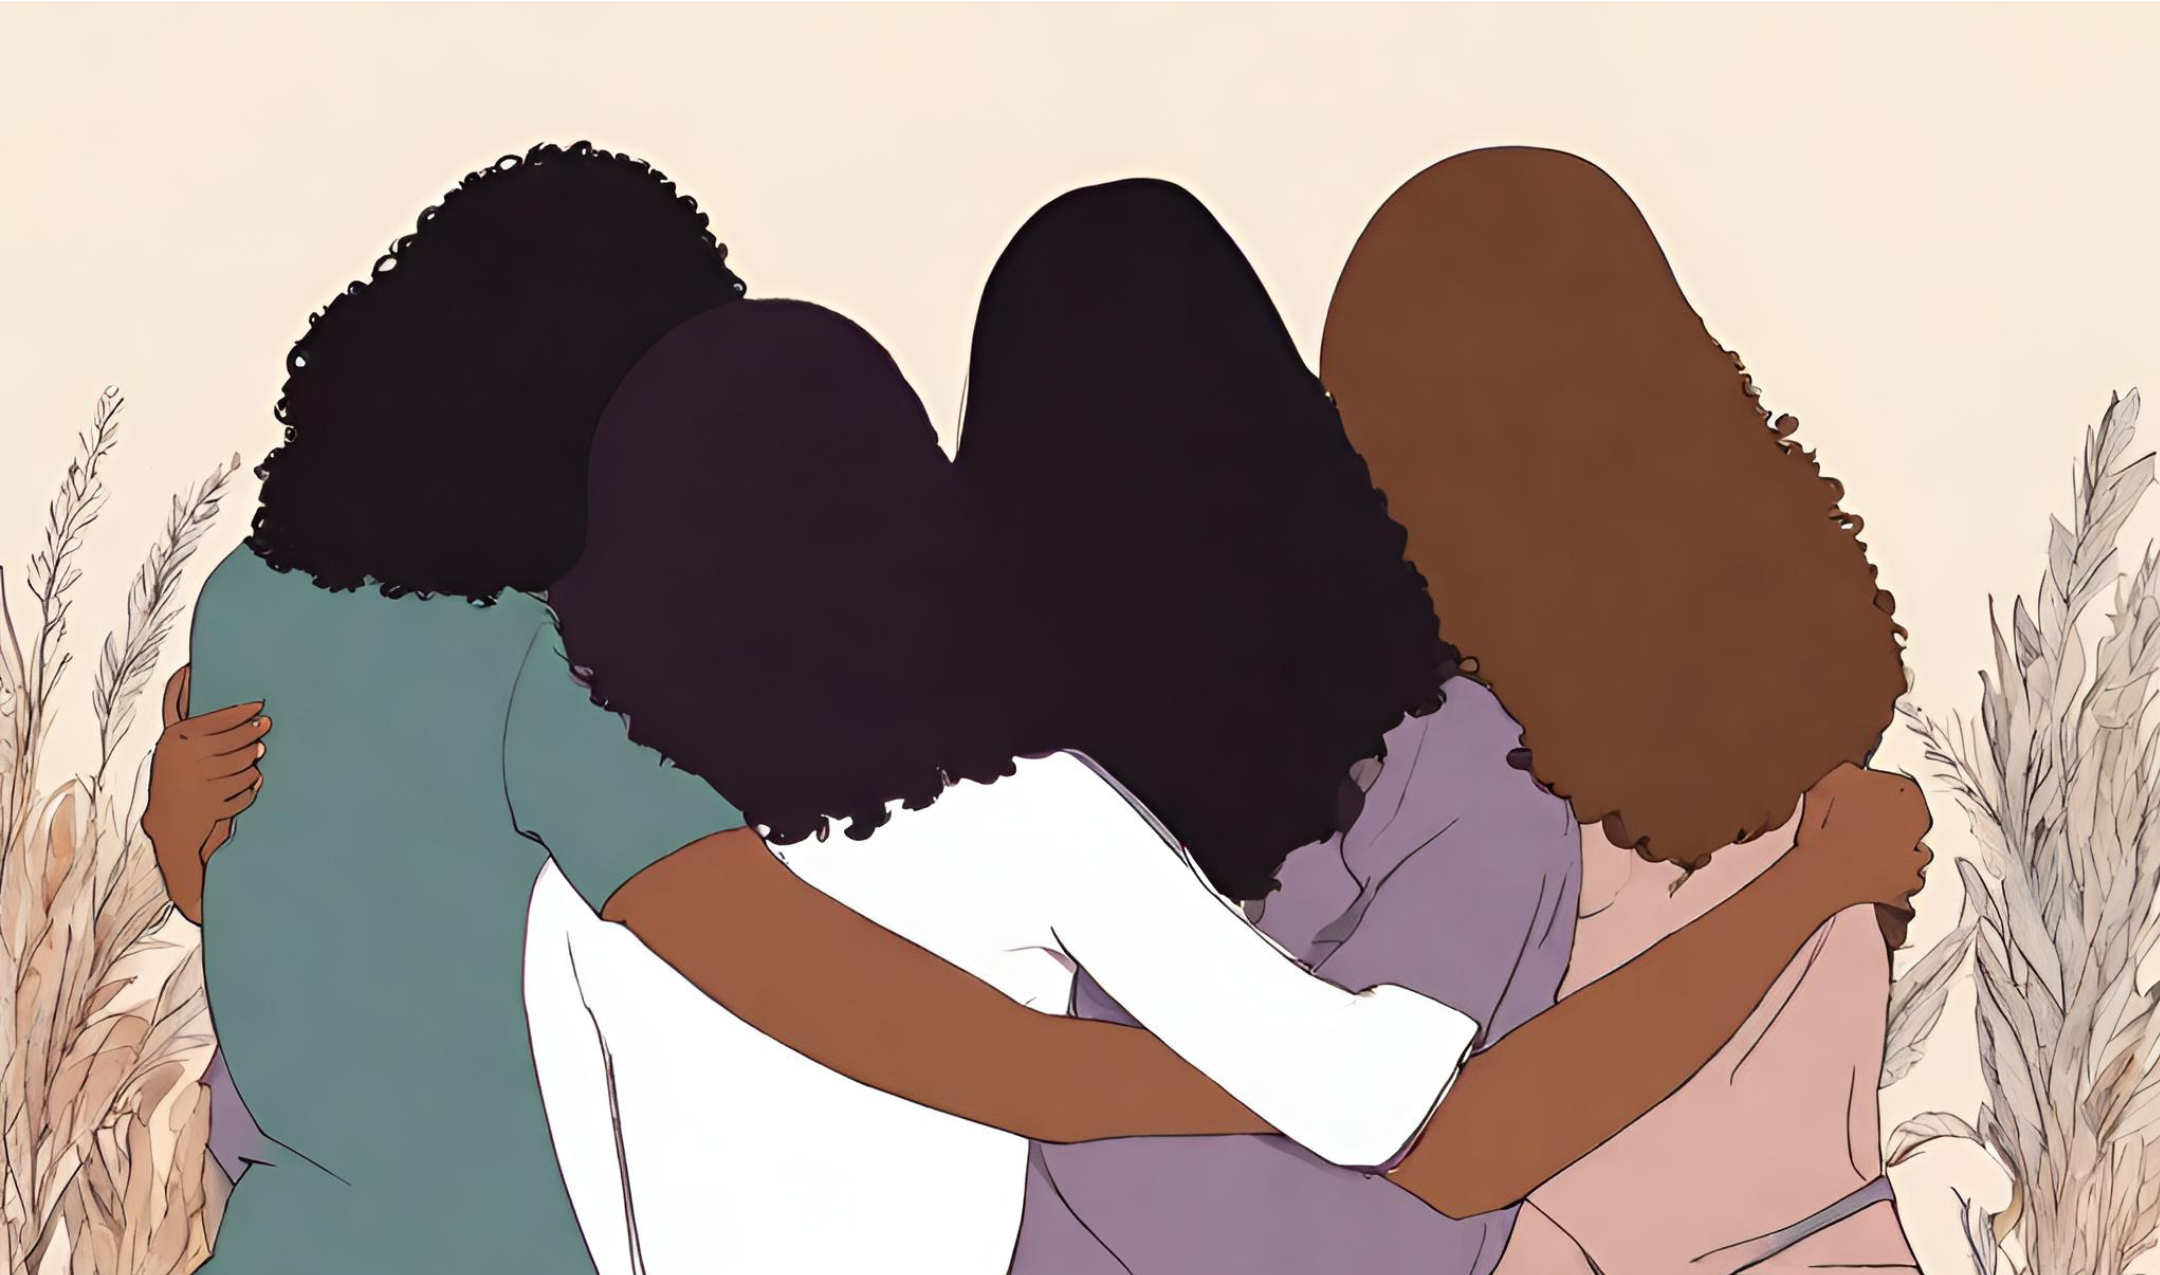 Illustration of Four women standing together and hugging each other in support.